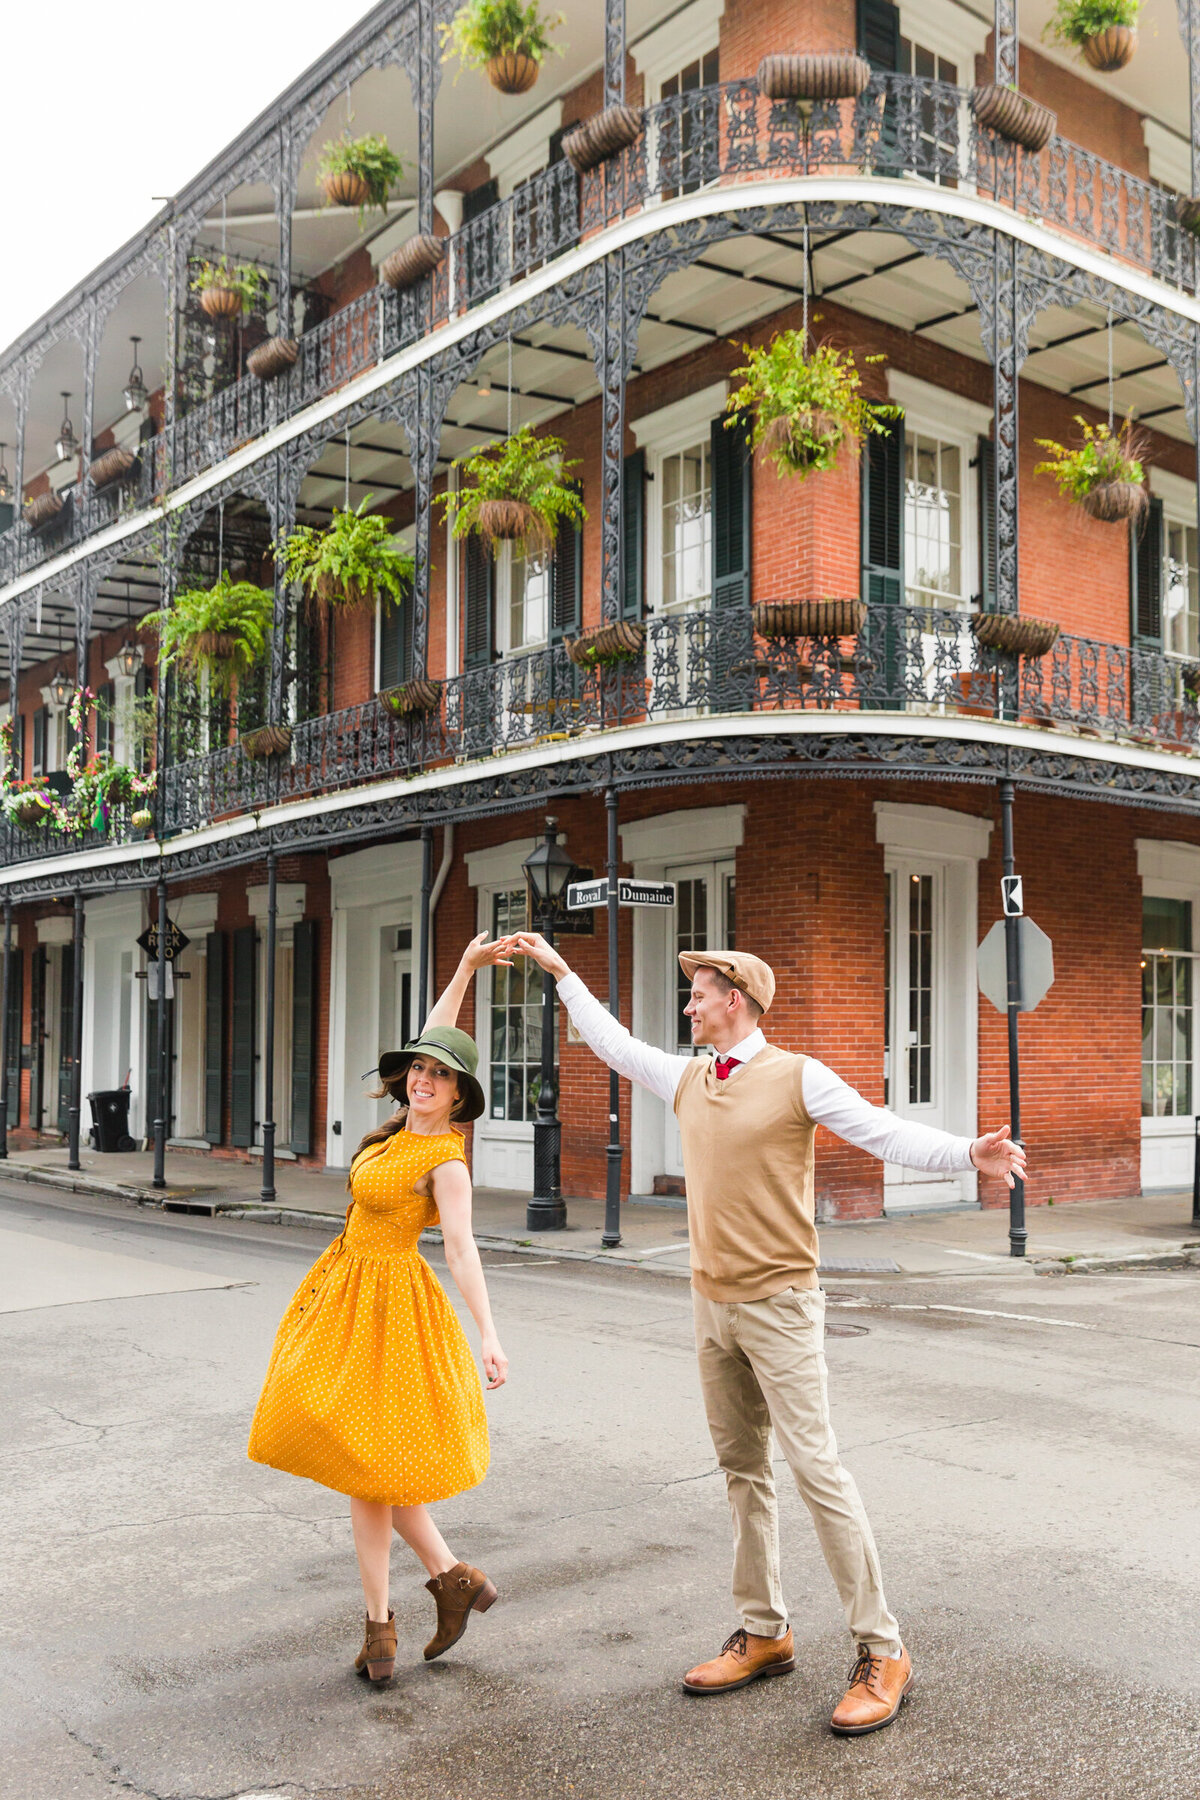 man twirling woman in couple photo in New Orleans